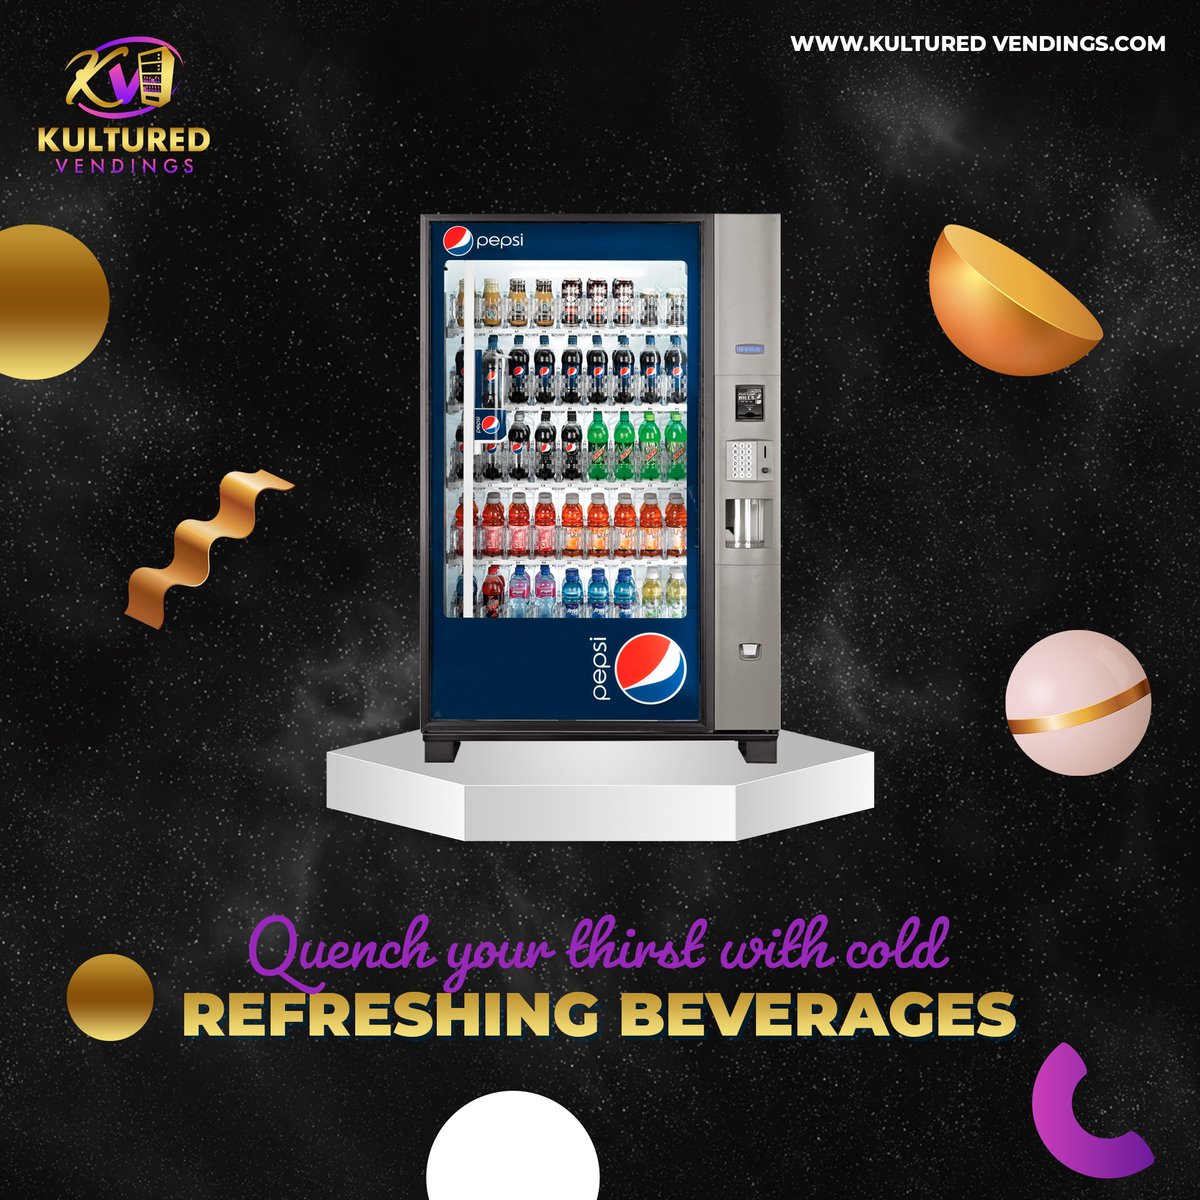 'Beat the heat with our cool and refreshing beverages! Which one is your favorite?'
#kulturedvending #vending #vendingmachine #beverage #vendingmachinebusiness #vendingmachines #vendingbusiness #coffee #snackvendingmachine #drinkvendingmachine #drinkvending #vendingmachinesnacks